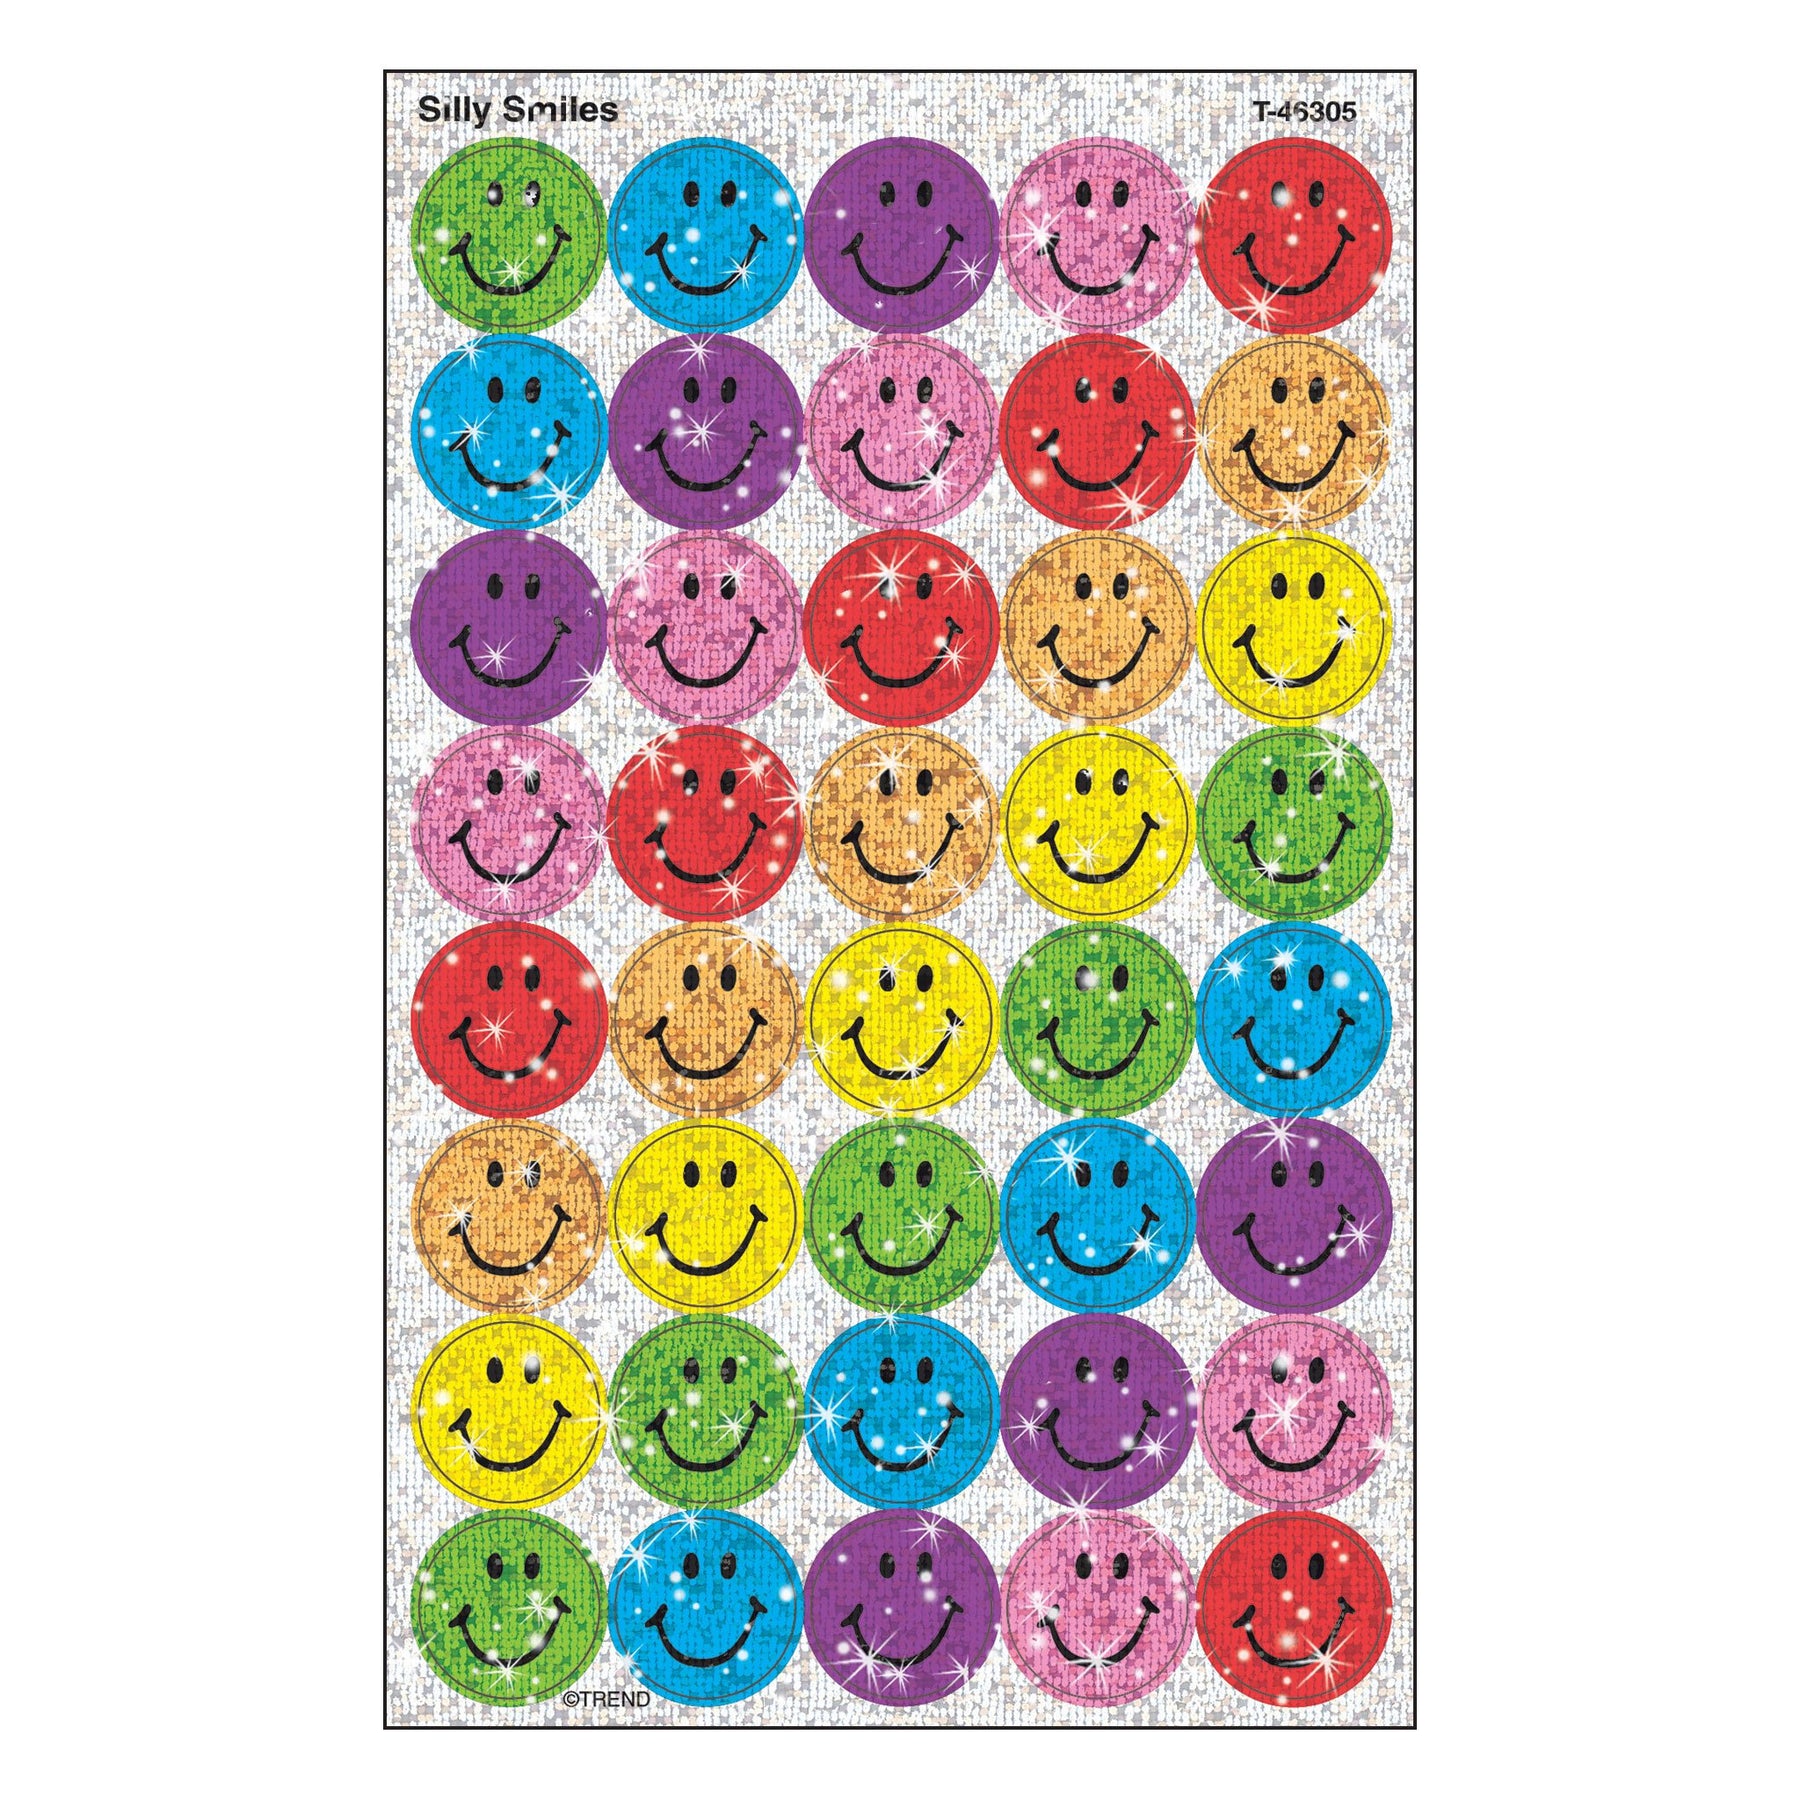 Smile Face Shiny Stickers, Rhode Island Novelty,RS-Smila Smiley Stickers -  The Craft Shop, Inc.